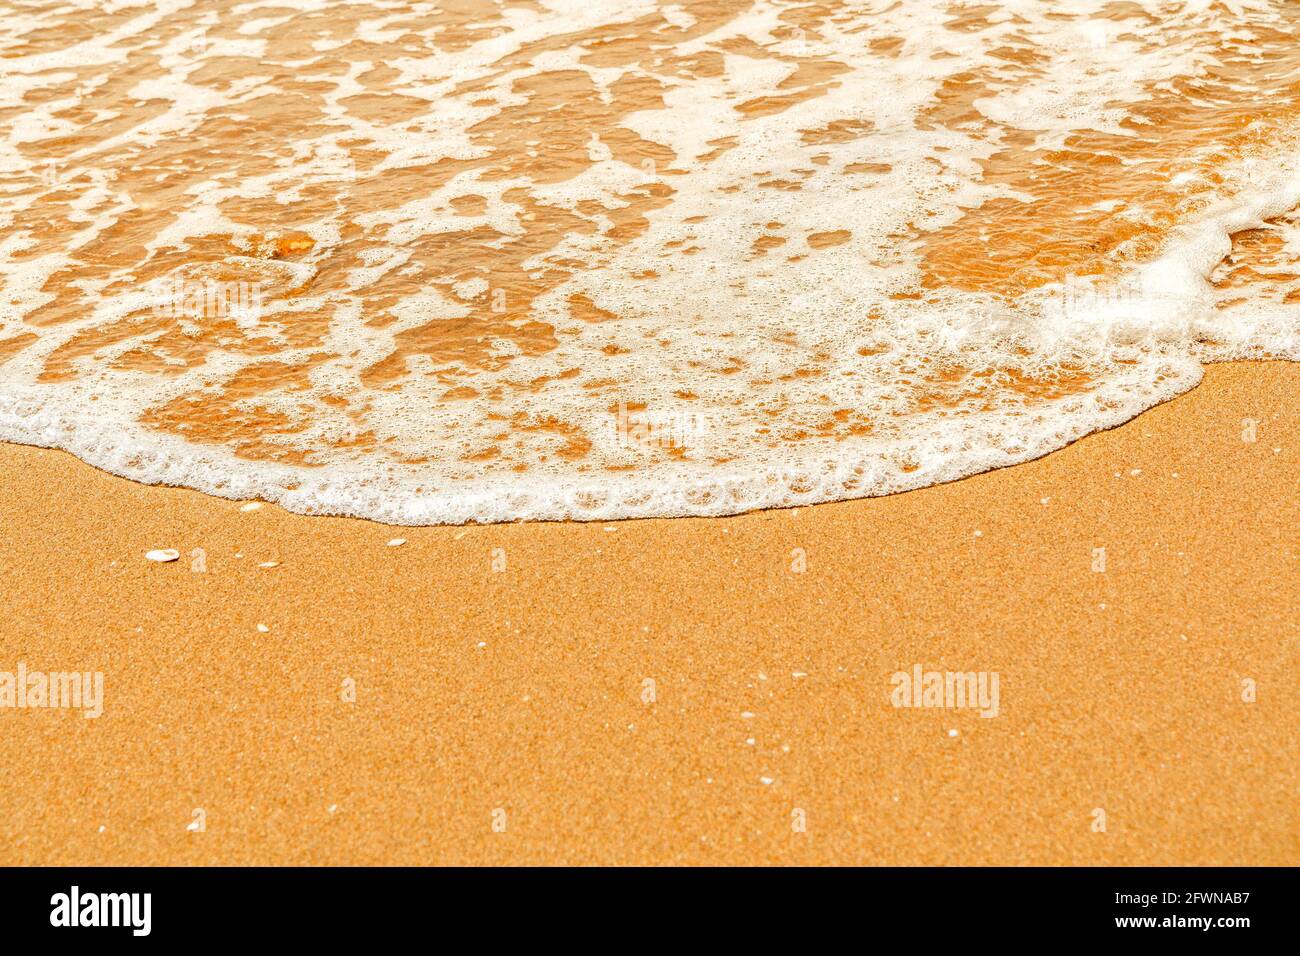 A sea wave with white foam splashes out onto the yellow sandy shore. Stock Photo